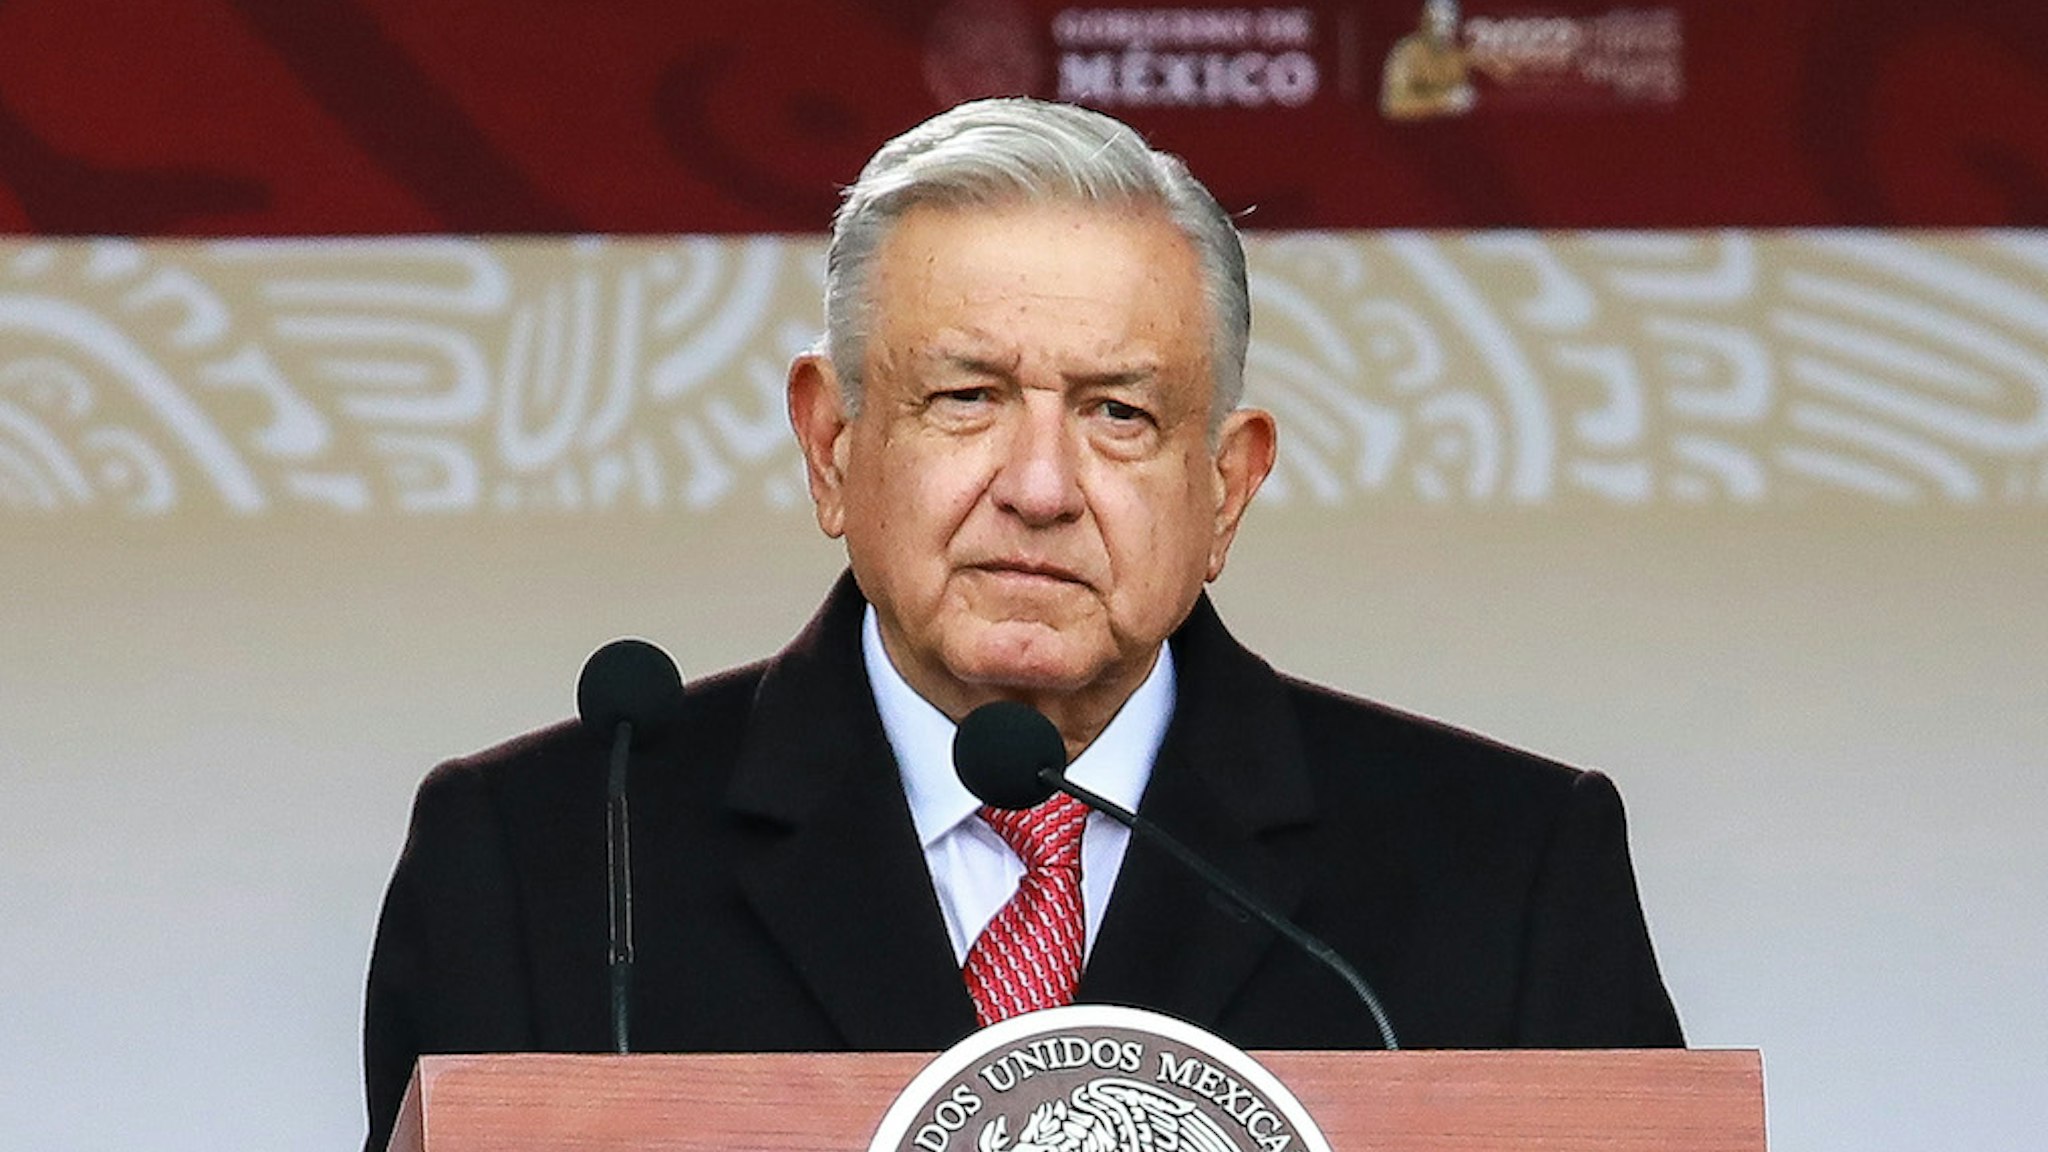 MEXICO CITY, MEXICO - NOVEMBER 20: Andres Manuel Lopez Obrador President of Mexico gestures during the parade to celebrate the 'Mexicans Celebrate the 112th Anniversary of the Mexican Revolution' at Zocalo on November 20, 2022 in Mexico City, Mexico. (Photo by Manuel Velasquez/Getty Images)